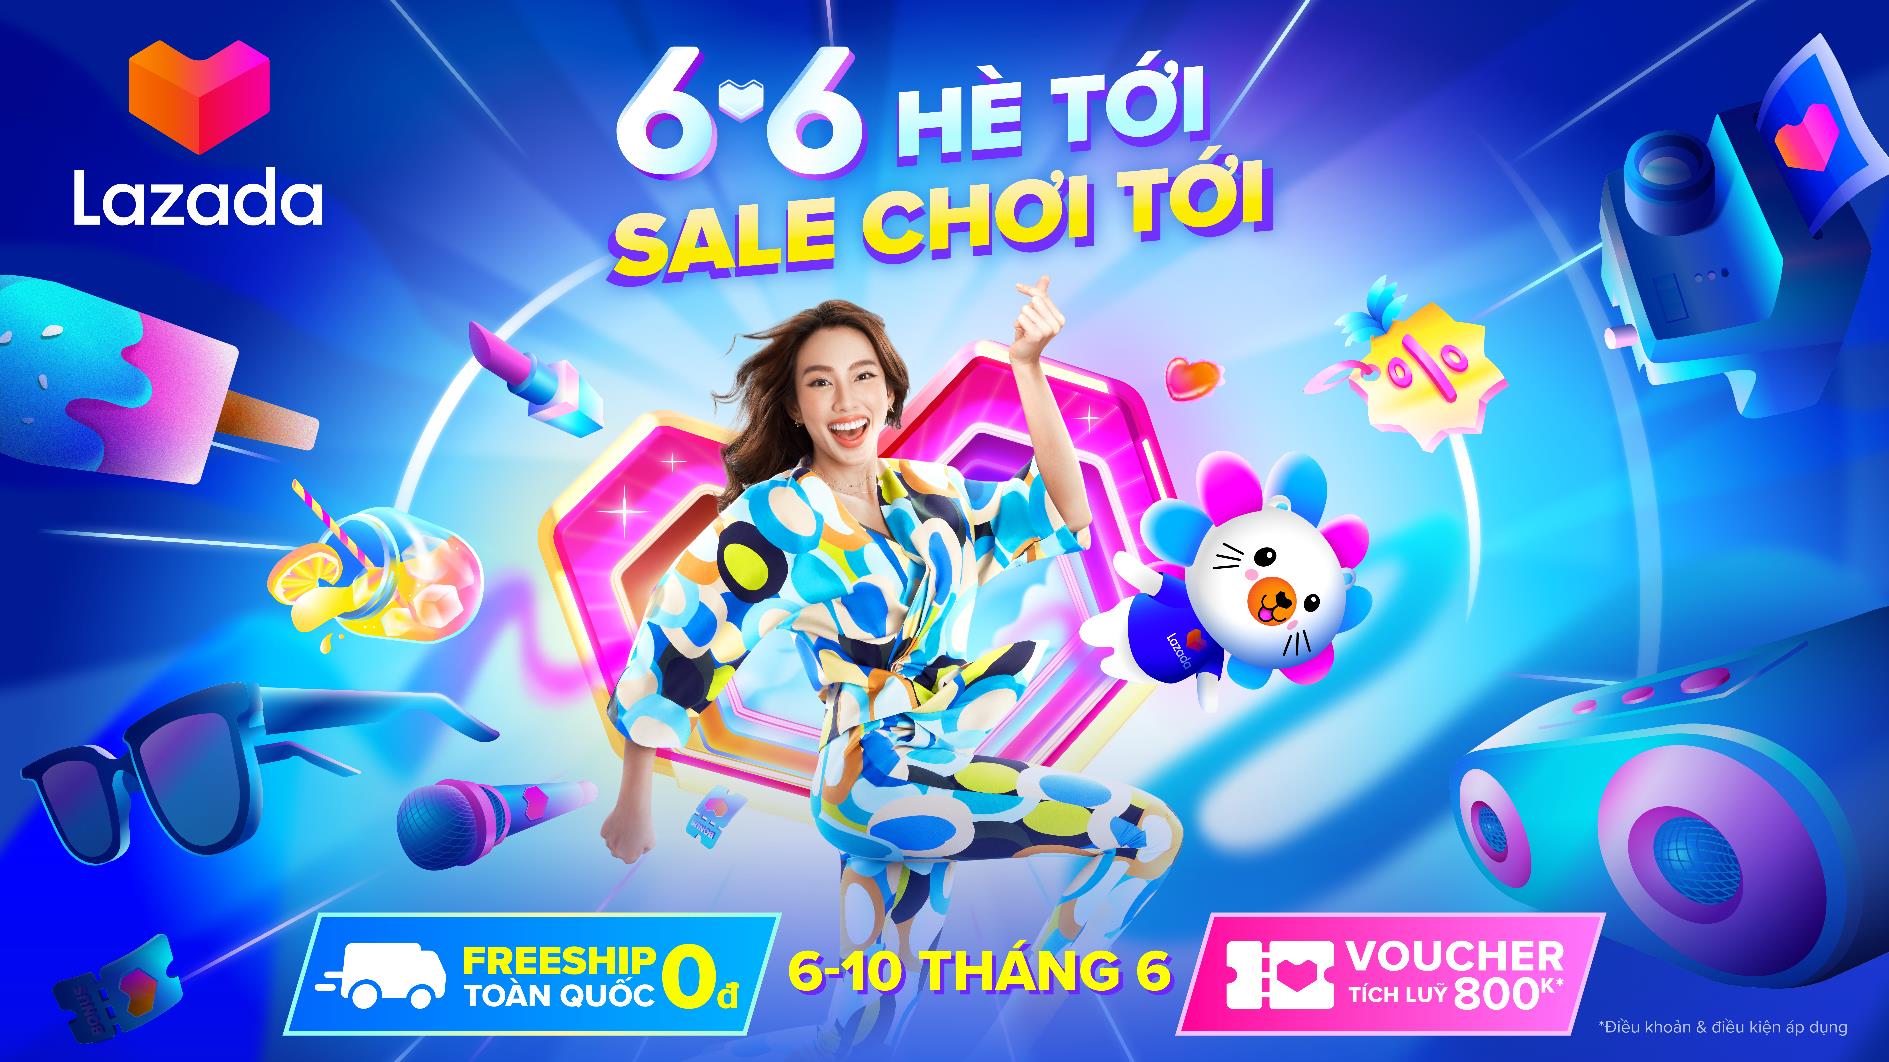 It turns out that the brilliant summer is because of... 6.6 Shopping Festival 